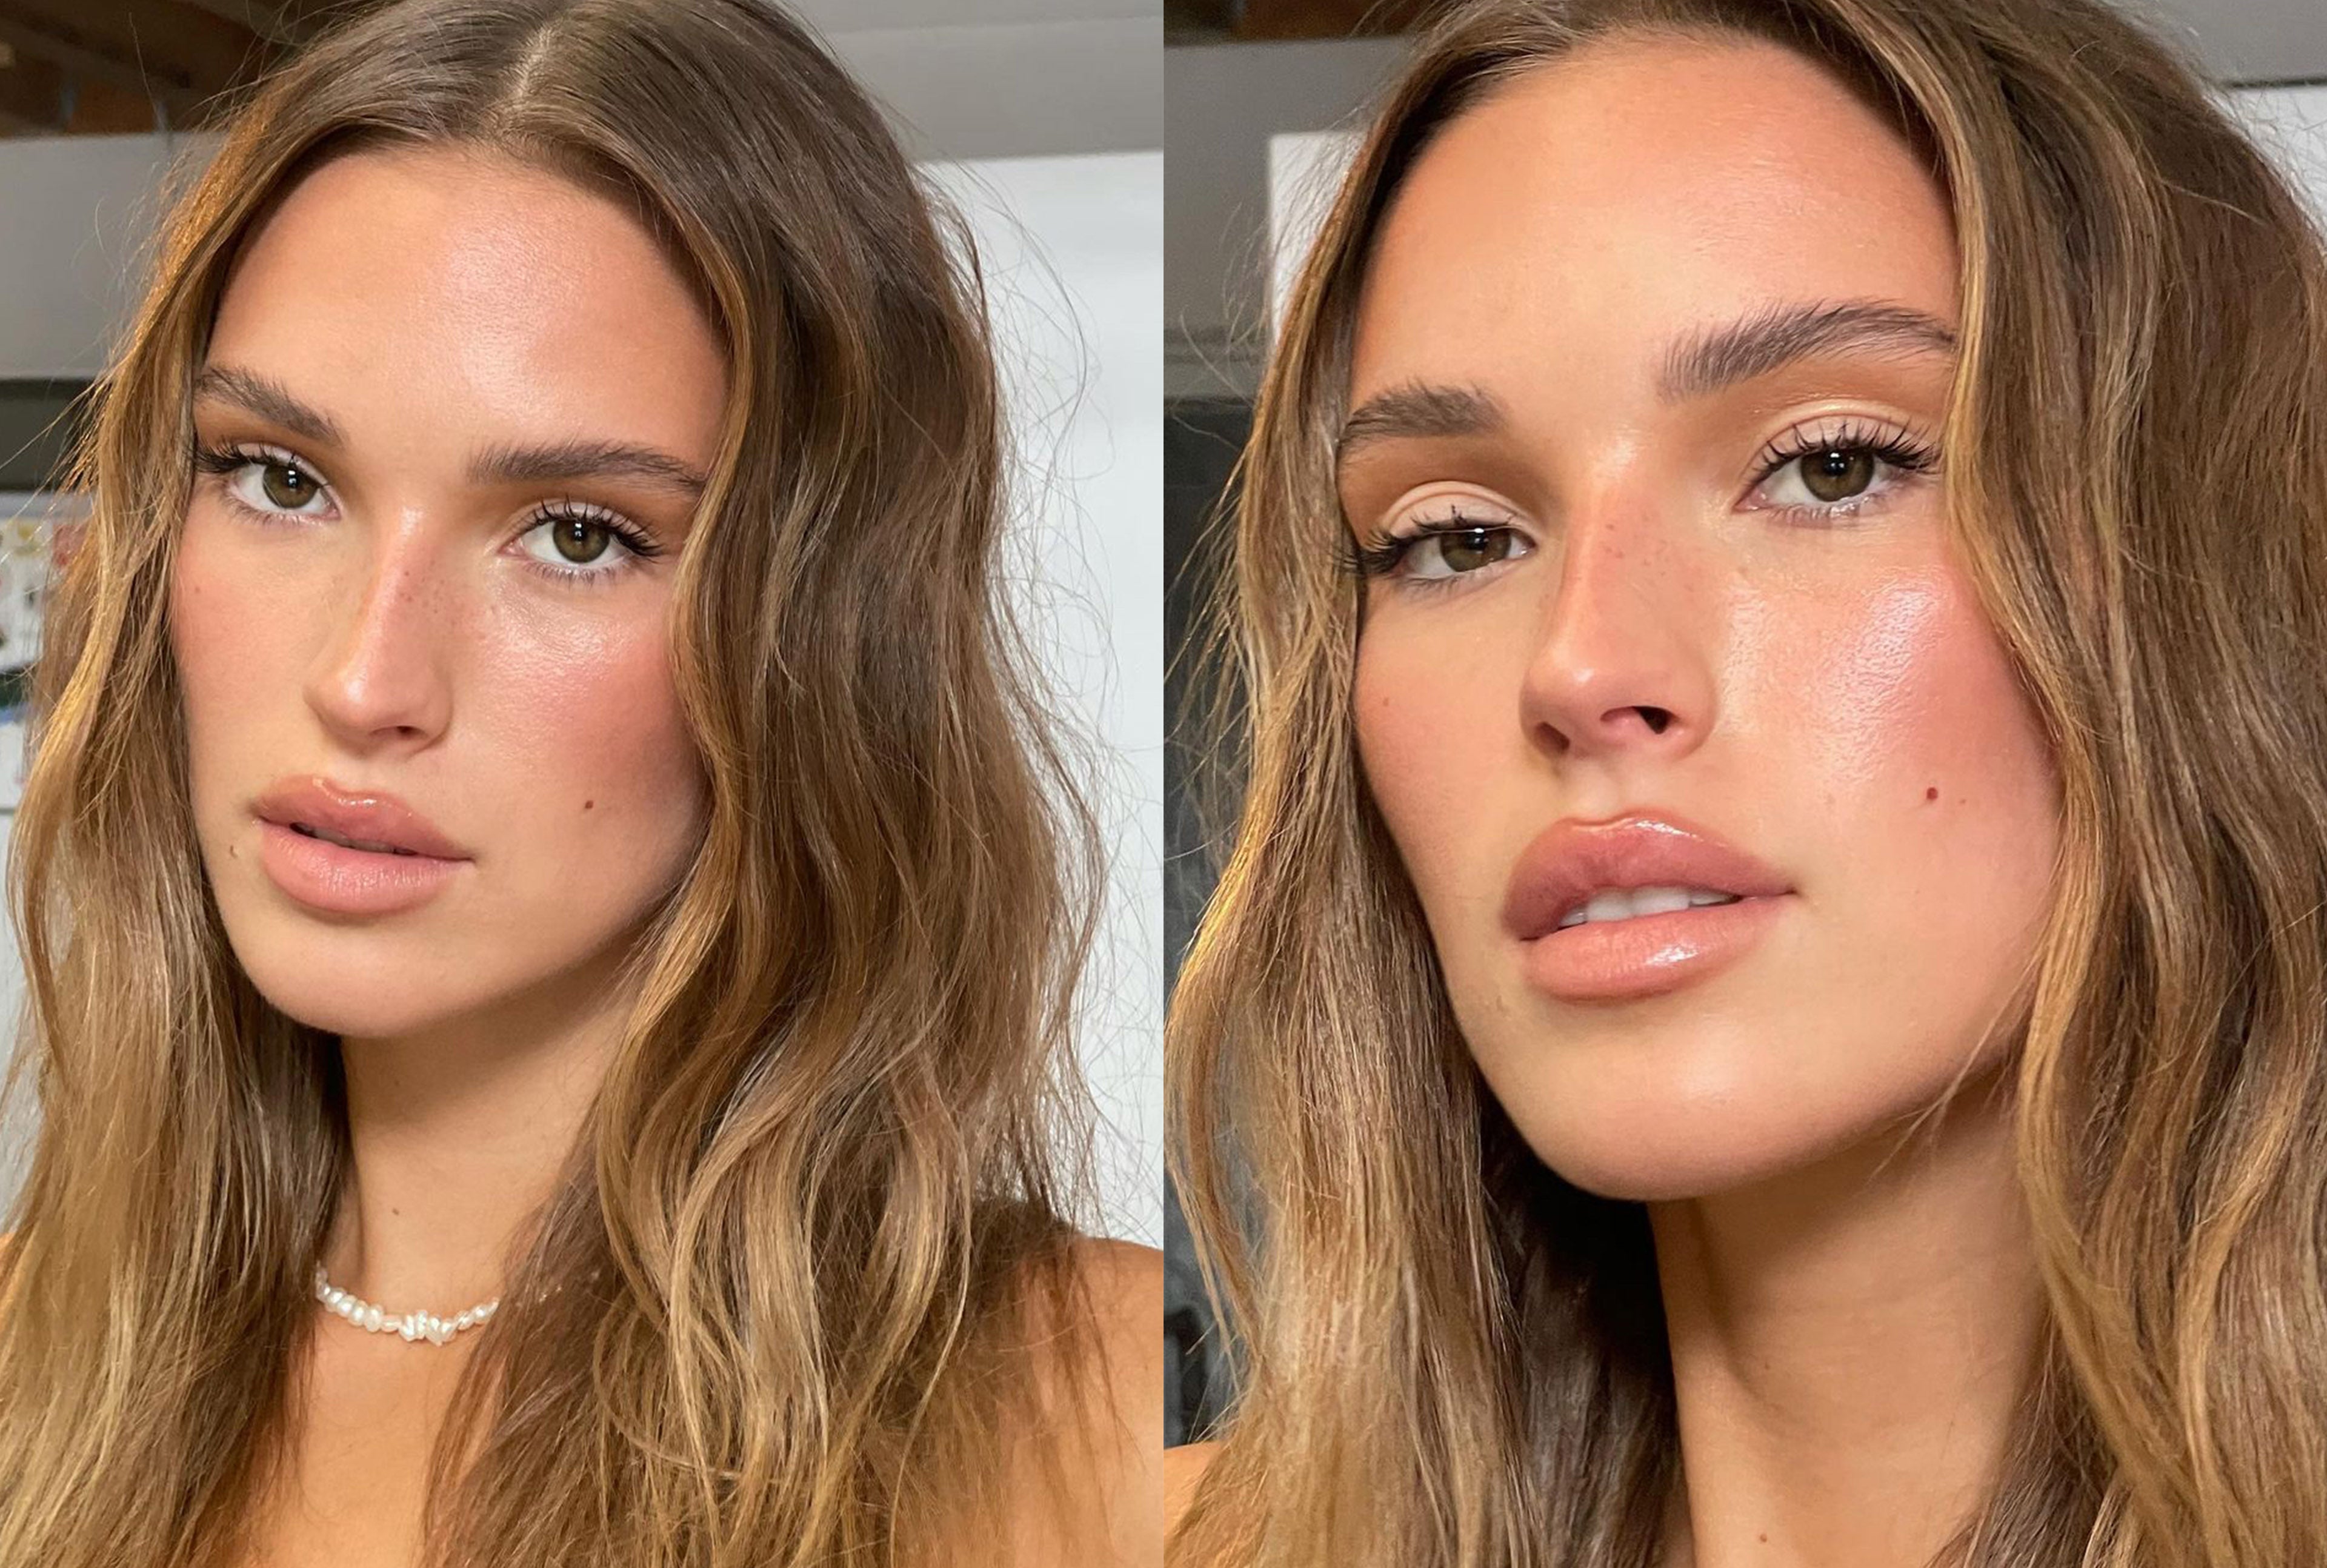 Matte Makeup Is Trending Again In 2023 – Here's How To Wear It